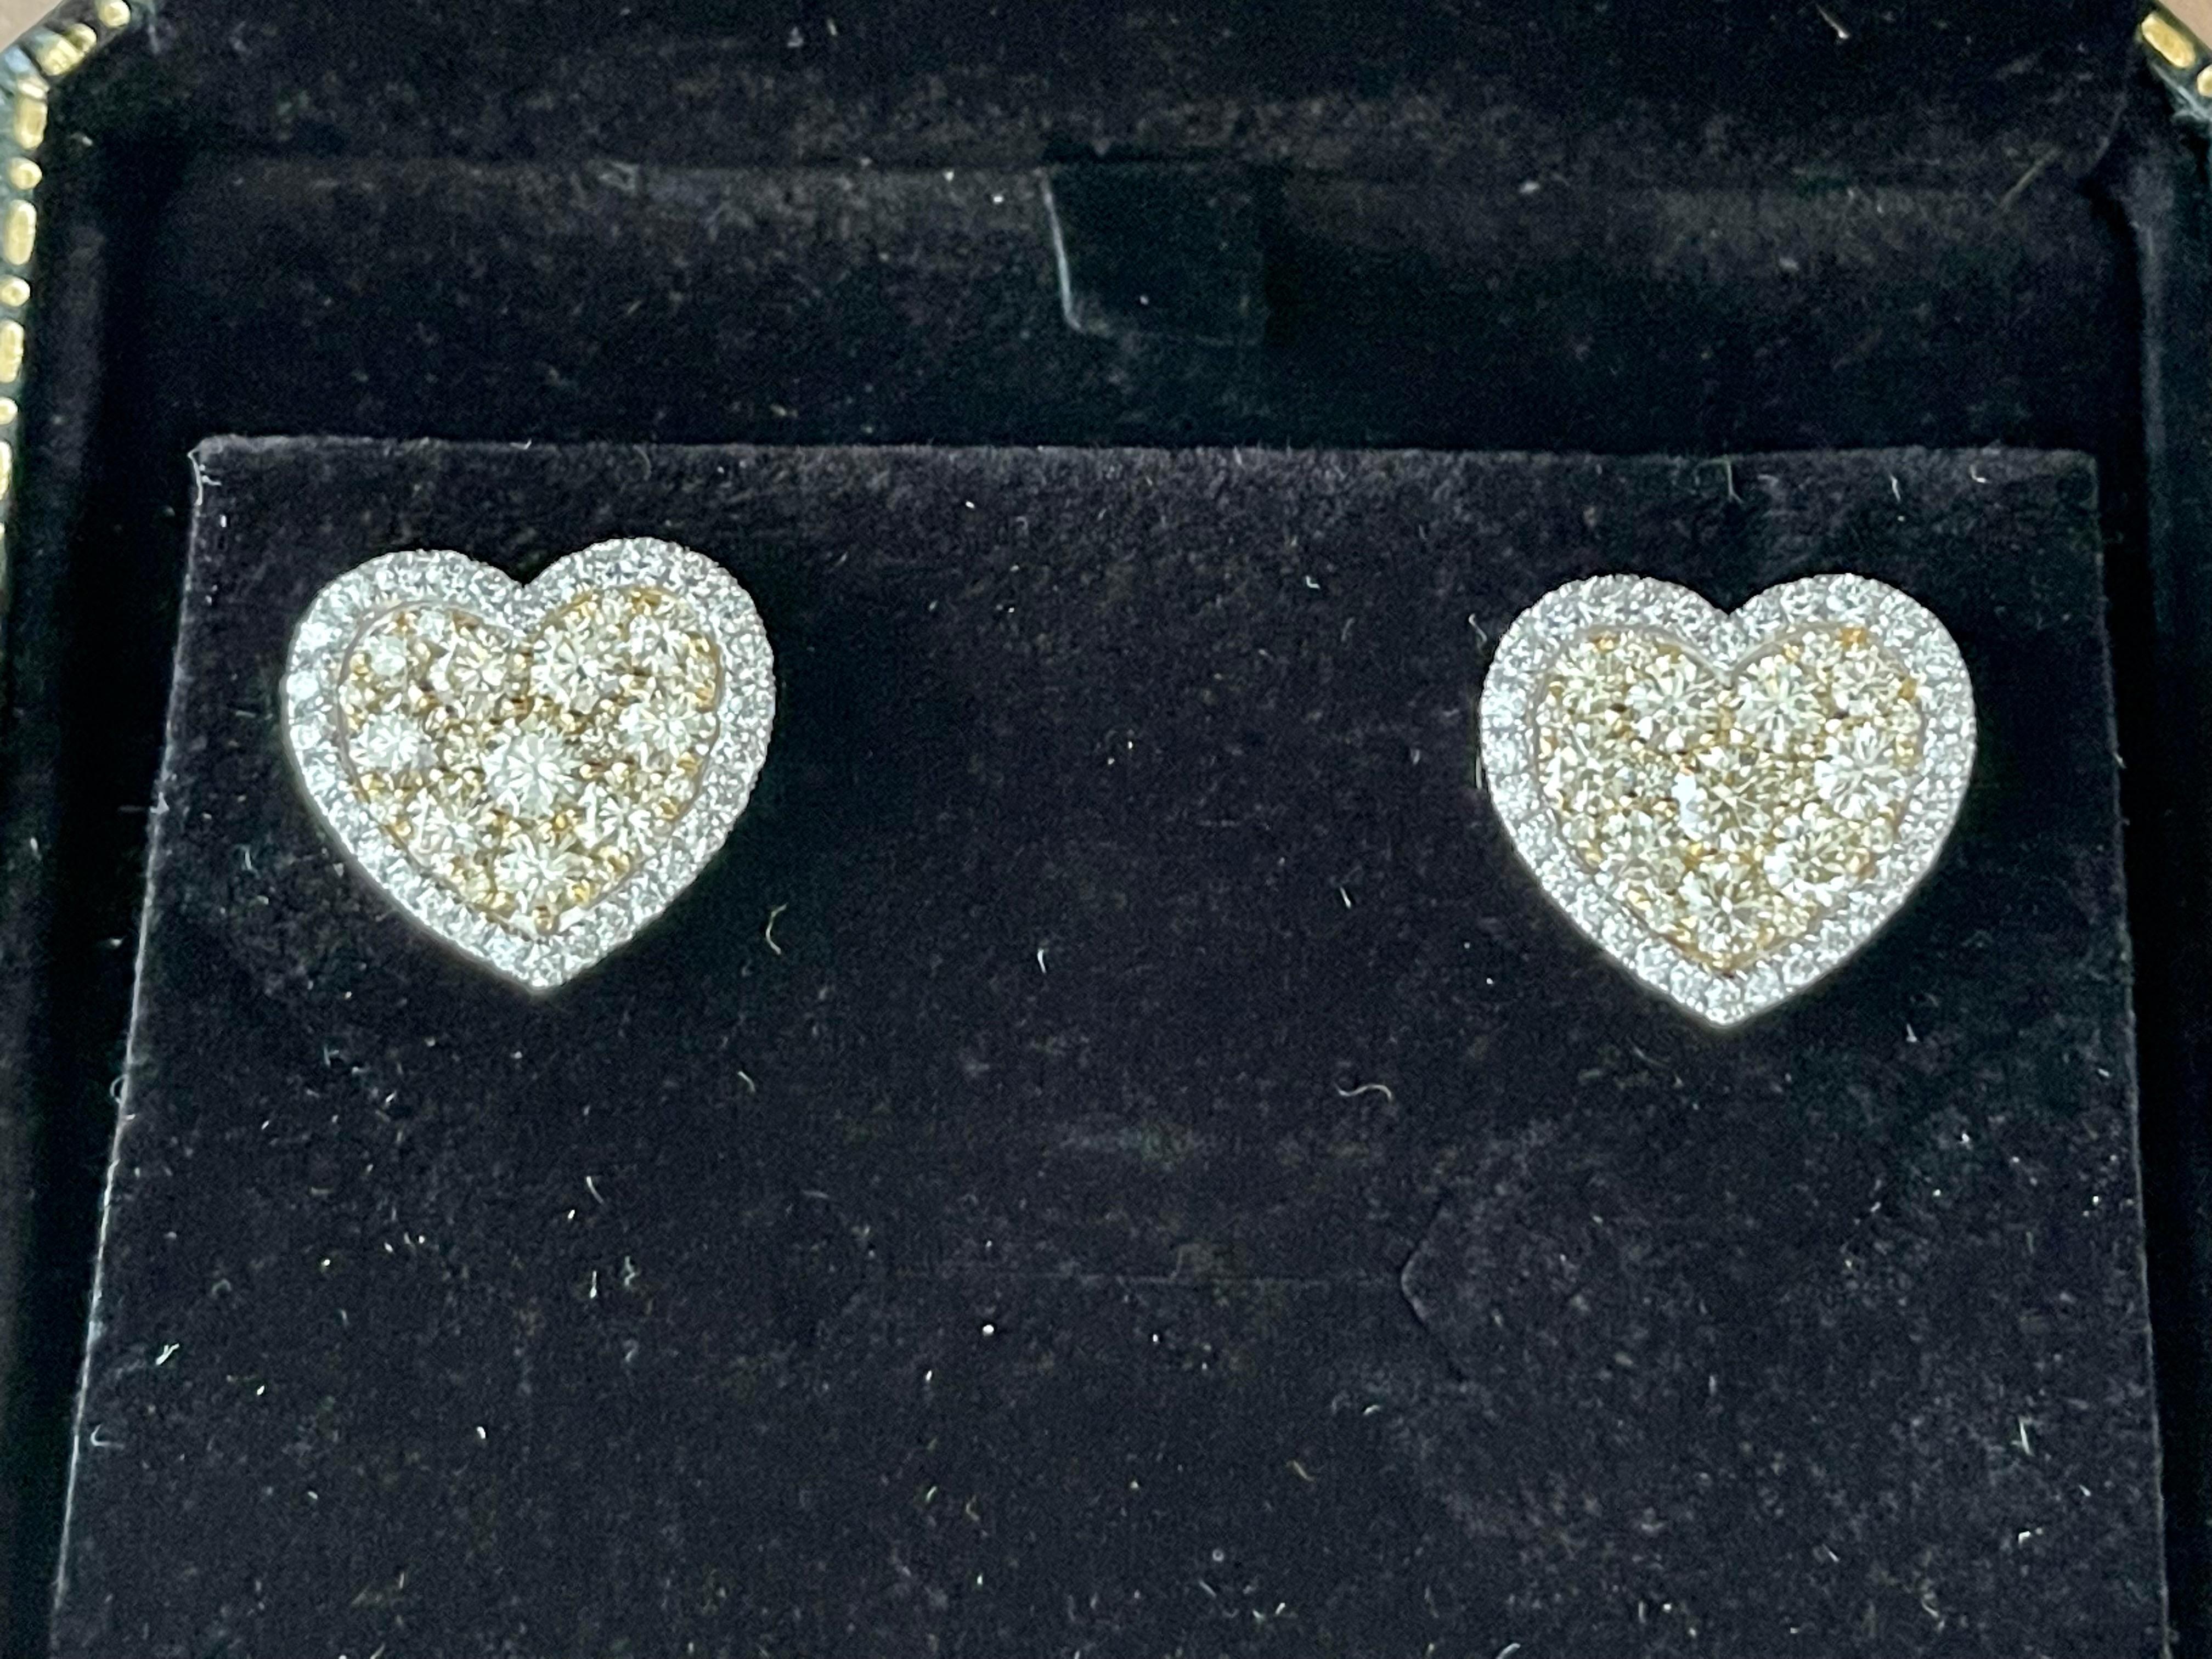 14 K Yelllow and White Gold 3.86 Total Carat Heart Shaped Earrings For Sale 5